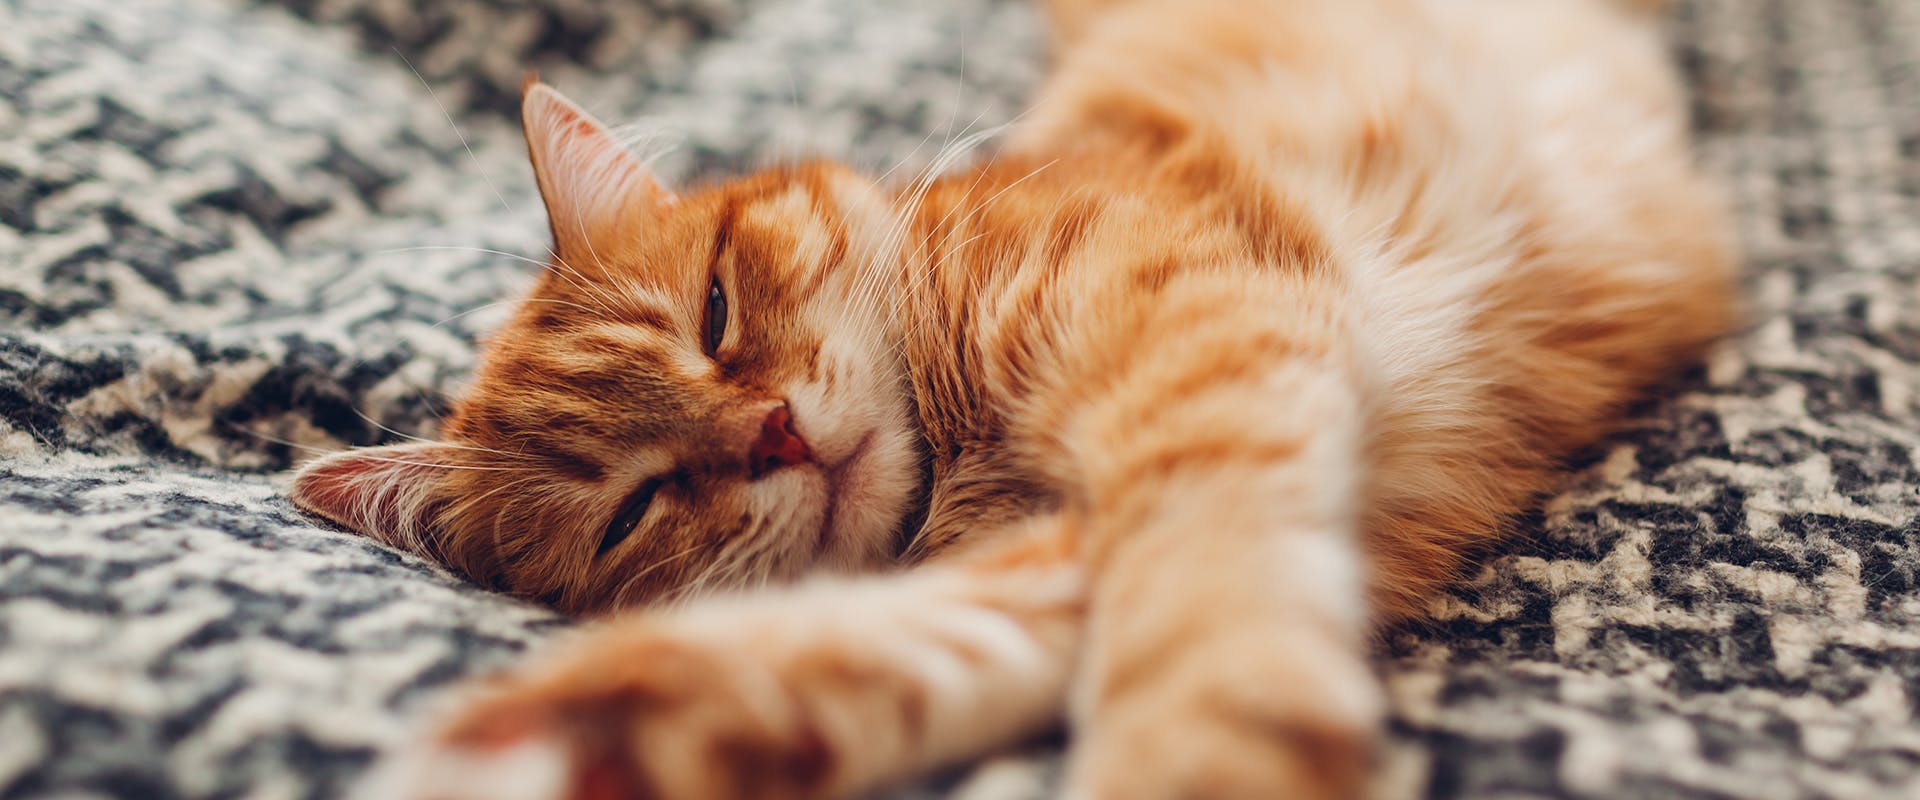 Why do cats sleep on you? A ginger cat sprawled out on a grey blanket